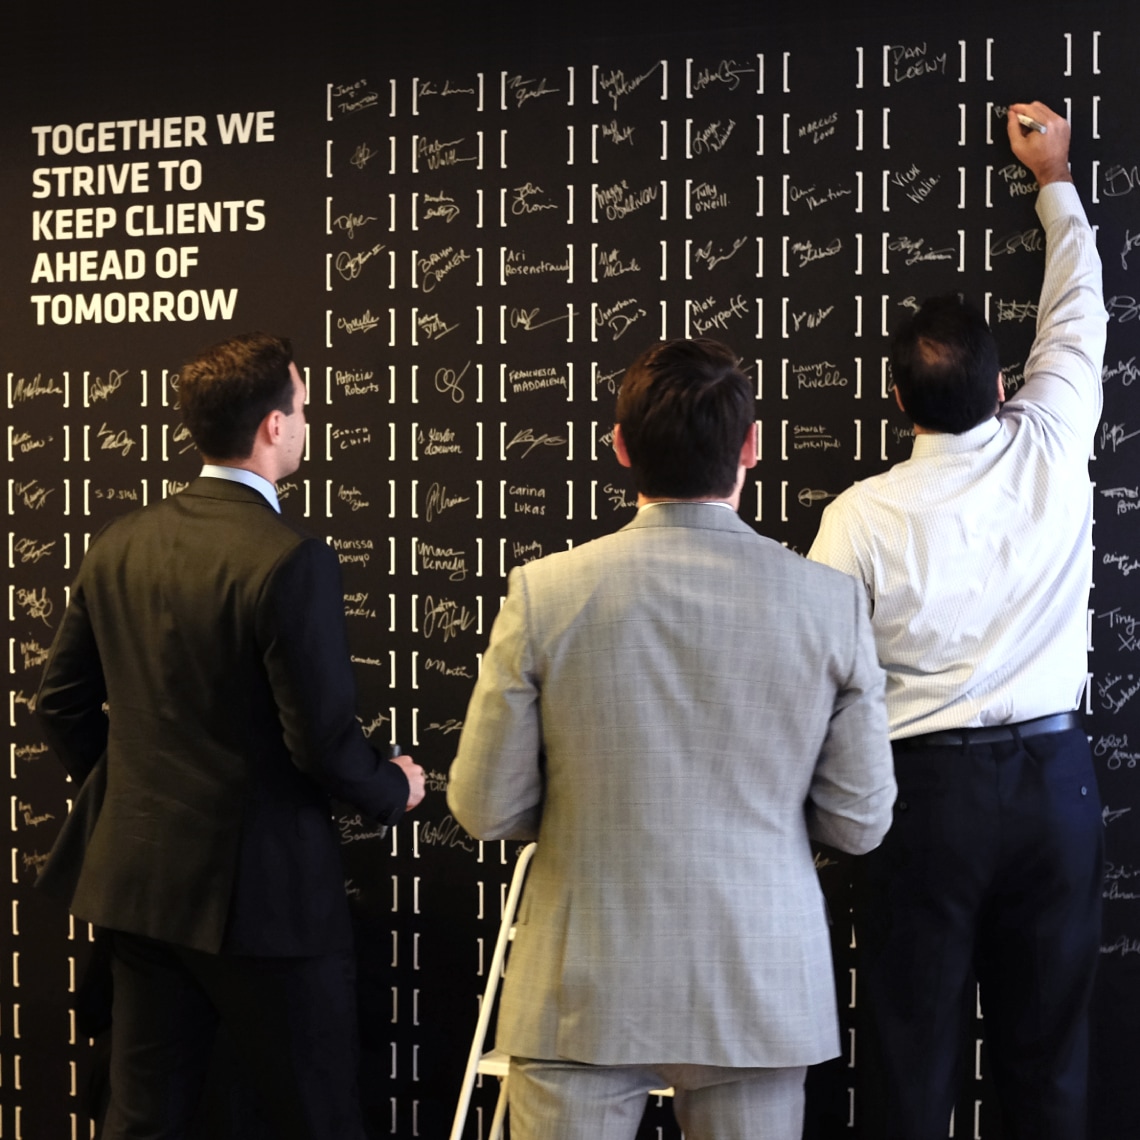 Three employees write their names on a wall, showing their connection to the new brand.